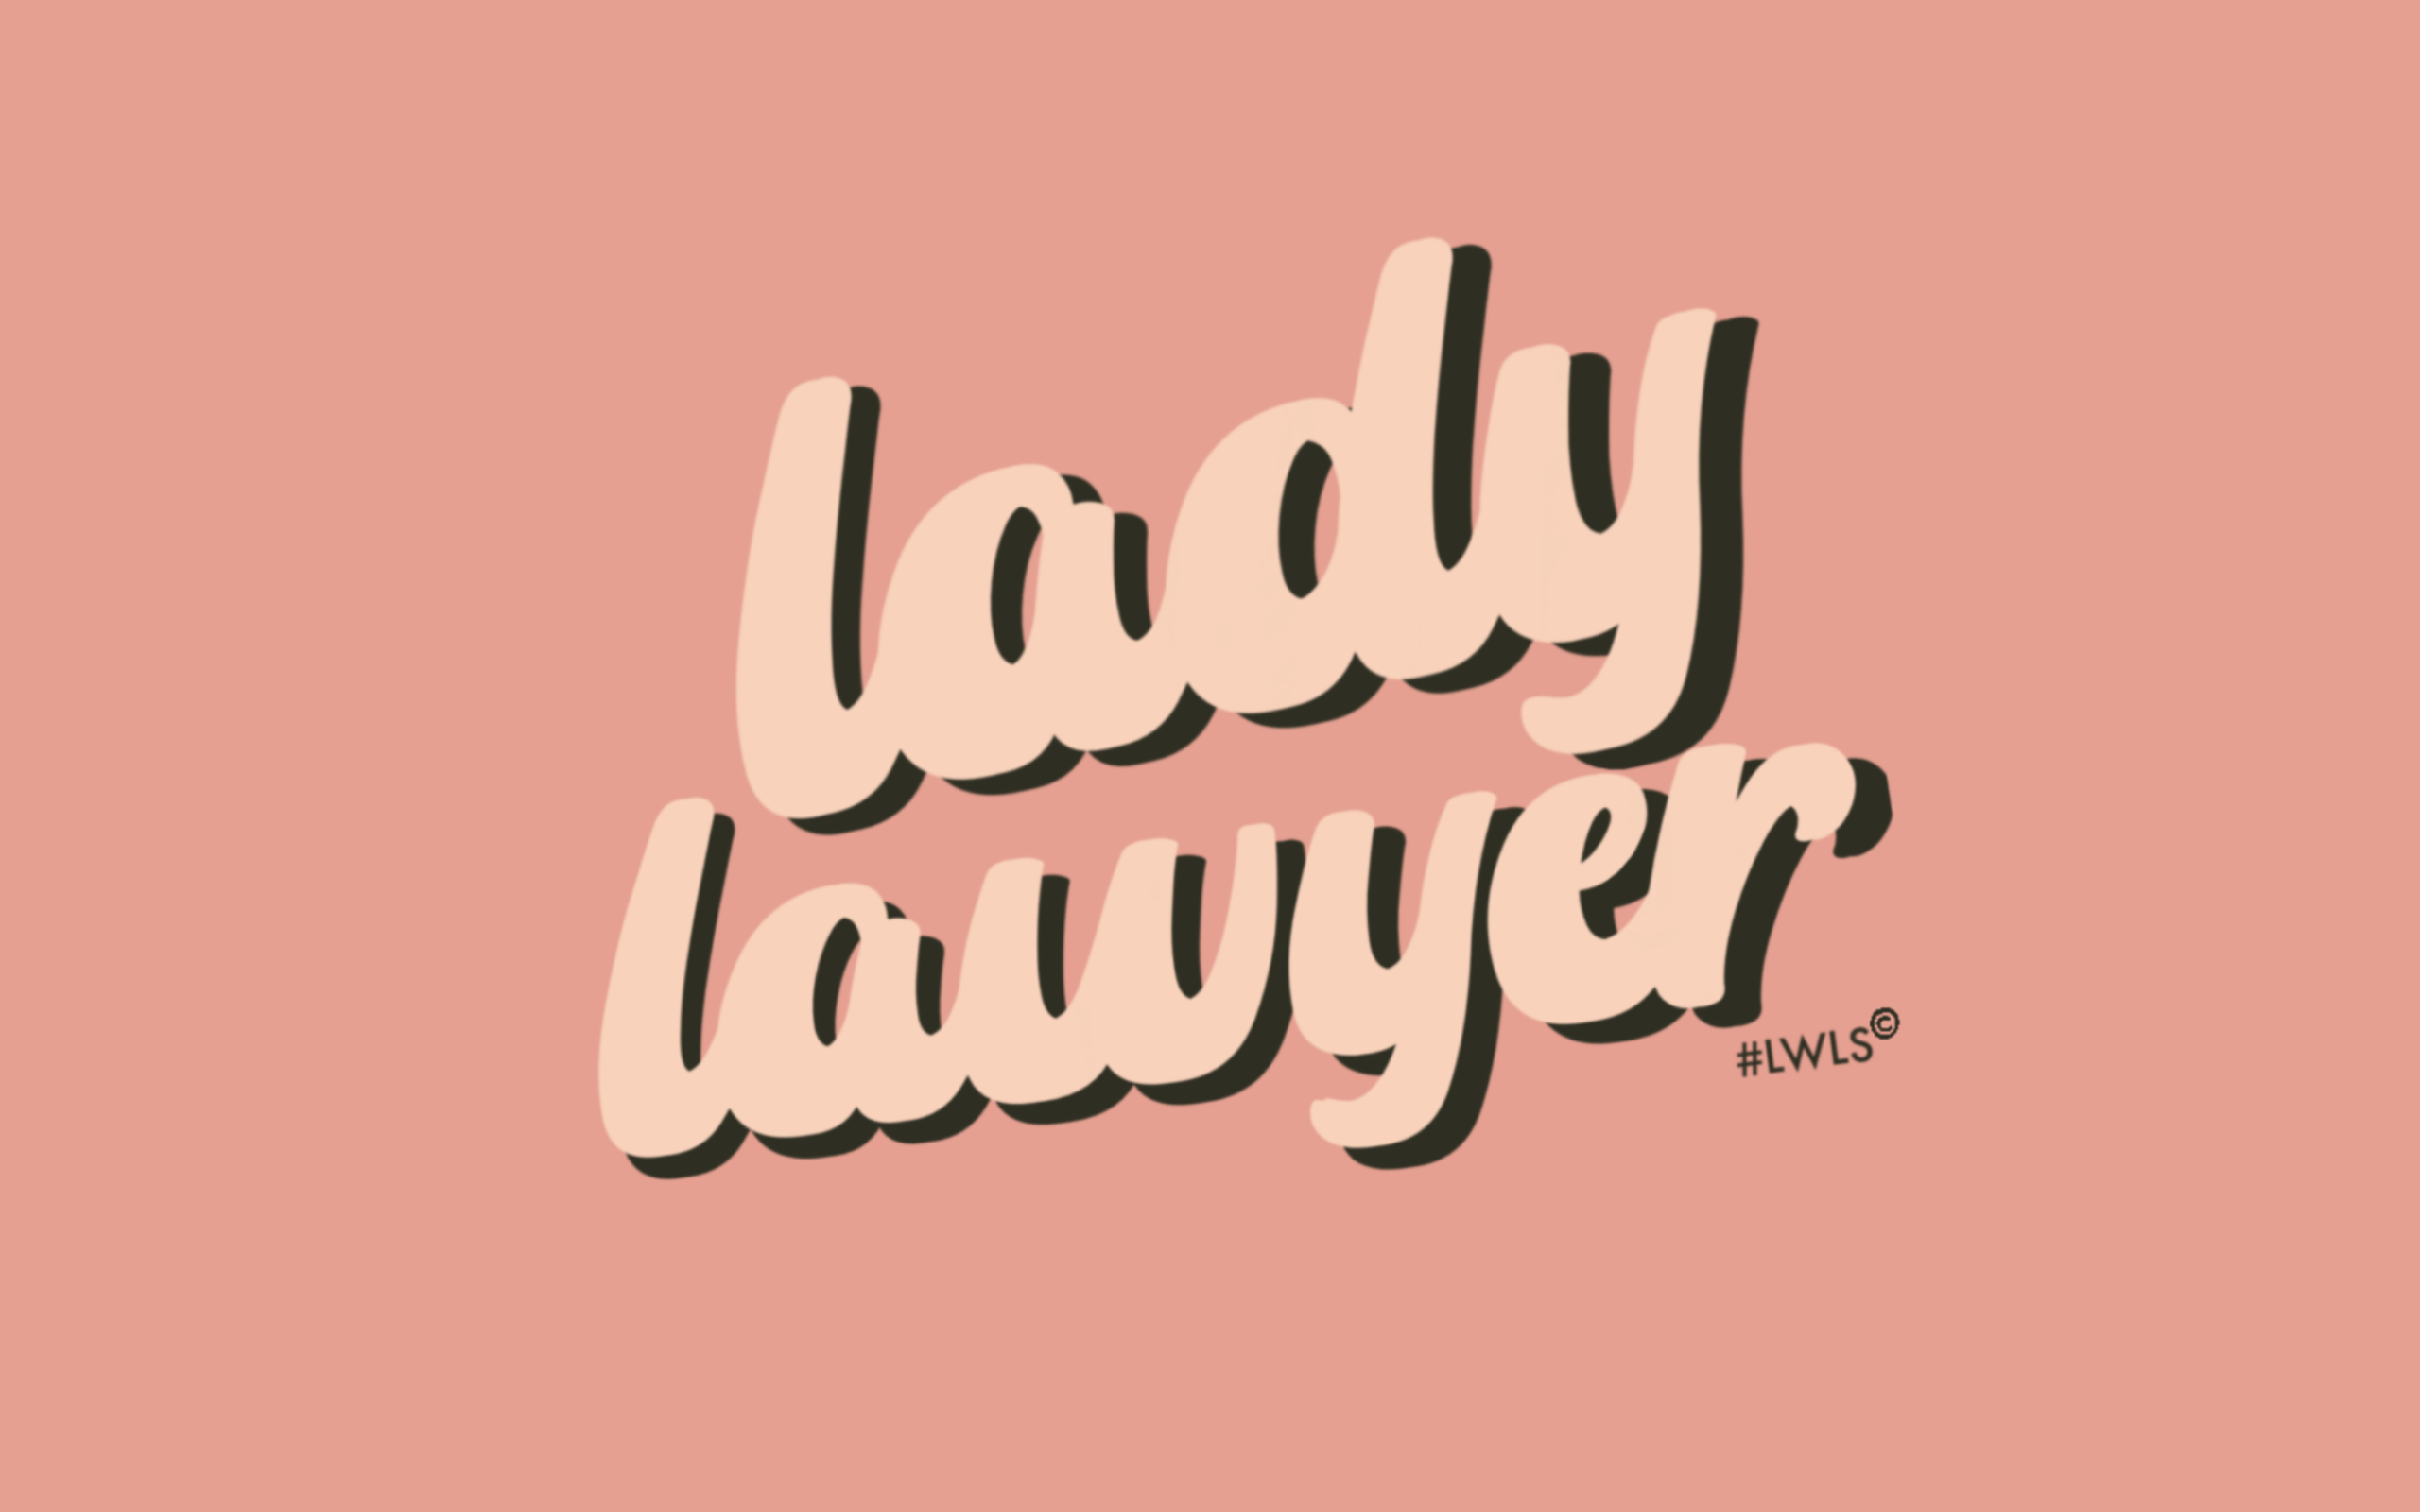 Lawyer wallpaper Stock Photos Royalty Free Lawyer wallpaper Images   Depositphotos